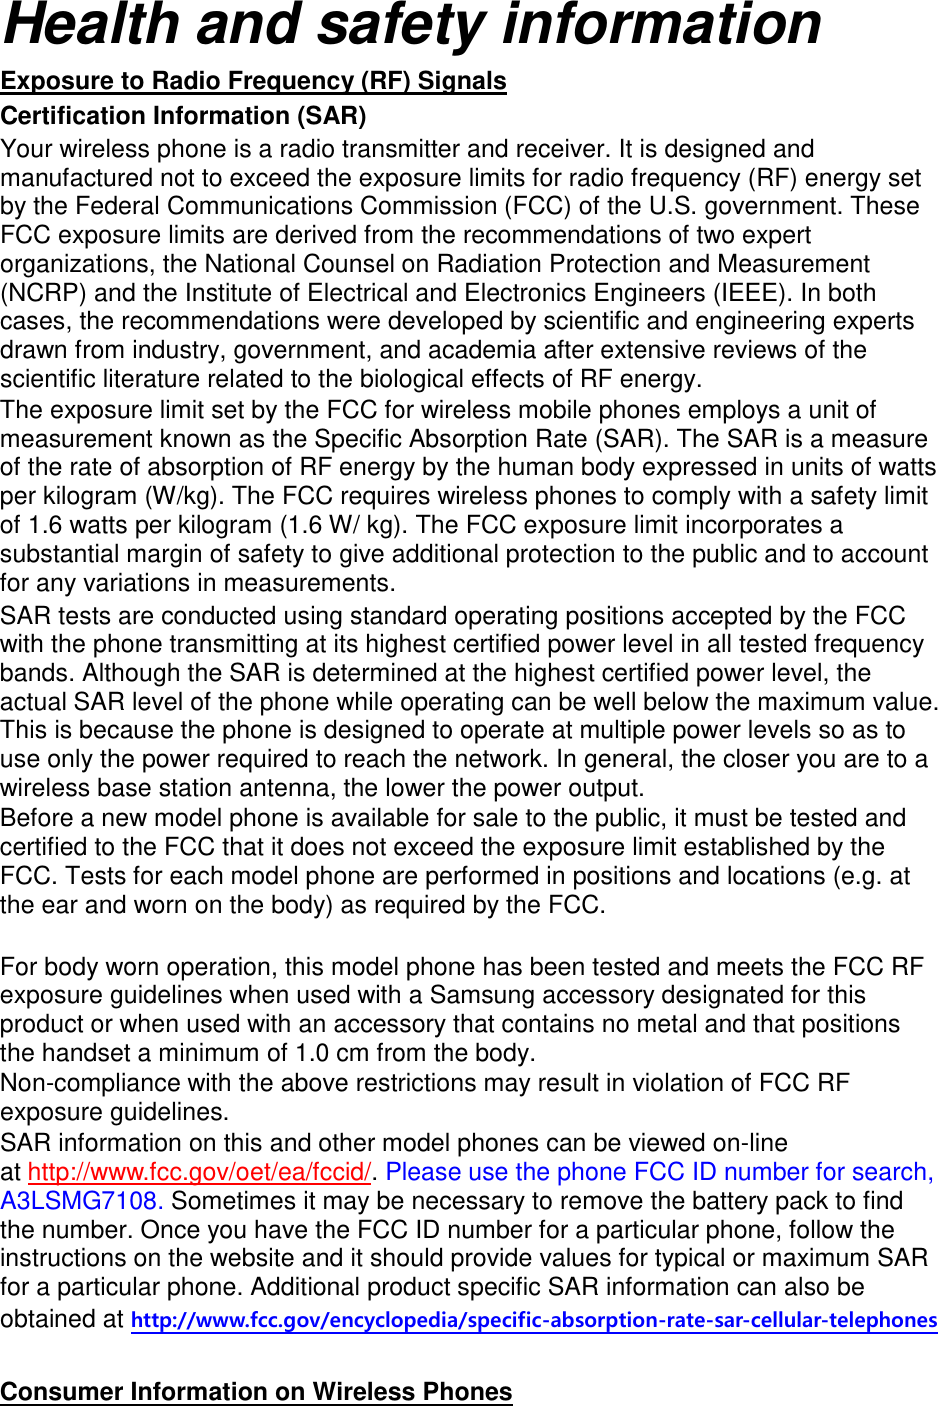 Health and safety information Certification Information (SAR) Exposure to Radio Frequency (RF) Signals Your wireless phone is a radio transmitter and receiver. It is designed and manufactured not to exceed the exposure limits for radio frequency (RF) energy set by the Federal Communications Commission (FCC) of the U.S. government. These FCC exposure limits are derived from the recommendations of two expert organizations, the National Counsel on Radiation Protection and Measurement (NCRP) and the Institute of Electrical and Electronics Engineers (IEEE). In both cases, the recommendations were developed by scientific and engineering experts drawn from industry, government, and academia after extensive reviews of the scientific literature related to the biological effects of RF energy. The exposure limit set by the FCC for wireless mobile phones employs a unit of measurement known as the Specific Absorption Rate (SAR). The SAR is a measure of the rate of absorption of RF energy by the human body expressed in units of watts per kilogram (W/kg). The FCC requires wireless phones to comply with a safety limit of 1.6 watts per kilogram (1.6 W/ kg). The FCC exposure limit incorporates a substantial margin of safety to give additional protection to the public and to account for any variations in measurements. SAR tests are conducted using standard operating positions accepted by the FCC with the phone transmitting at its highest certified power level in all tested frequency bands. Although the SAR is determined at the highest certified power level, the actual SAR level of the phone while operating can be well below the maximum value. This is because the phone is designed to operate at multiple power levels so as to use only the power required to reach the network. In general, the closer you are to a wireless base station antenna, the lower the power output. Before a new model phone is available for sale to the public, it must be tested and certified to the FCC that it does not exceed the exposure limit established by the FCC. Tests for each model phone are performed in positions and locations (e.g. at the ear and worn on the body) as required by the FCC.      For body worn operation, this model phone has been tested and meets the FCC RF exposure guidelines when used with a Samsung accessory designated for this product or when used with an accessory that contains no metal and that positions the handset a minimum of 1.0 cm from the body.   Non-compliance with the above restrictions may result in violation of FCC RF exposure guidelines. SAR information on this and other model phones can be viewed on-line at http://www.fcc.gov/oet/ea/fccid/. Please use the phone FCC ID number for search, A3LSMG7108. Sometimes it may be necessary to remove the battery pack to find the number. Once you have the FCC ID number for a particular phone, follow the instructions on the website and it should provide values for typical or maximum SAR for a particular phone. Additional product specific SAR information can also be obtained at http://www.fcc.gov/encyclopedia/specific-absorption-rate-sar-cellular-telephones  Consumer Information on Wireless Phones 